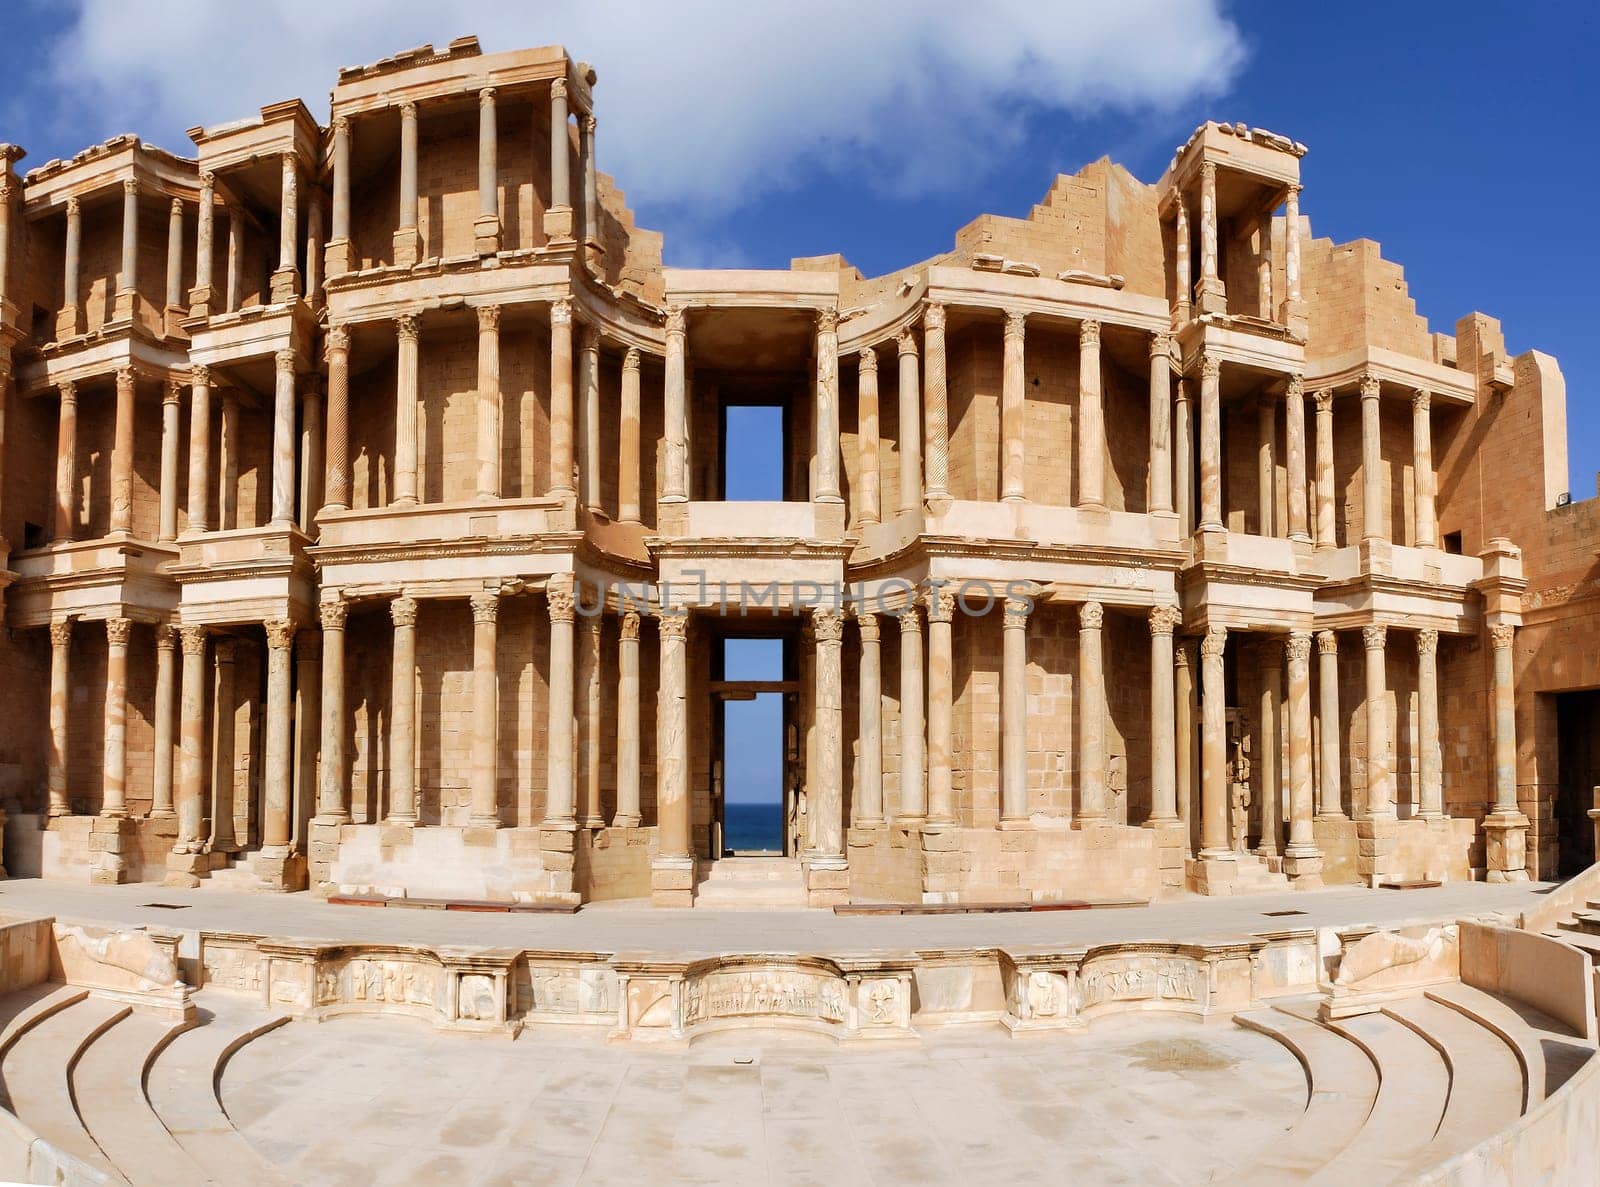 The ruins of Sabratha by Giamplume